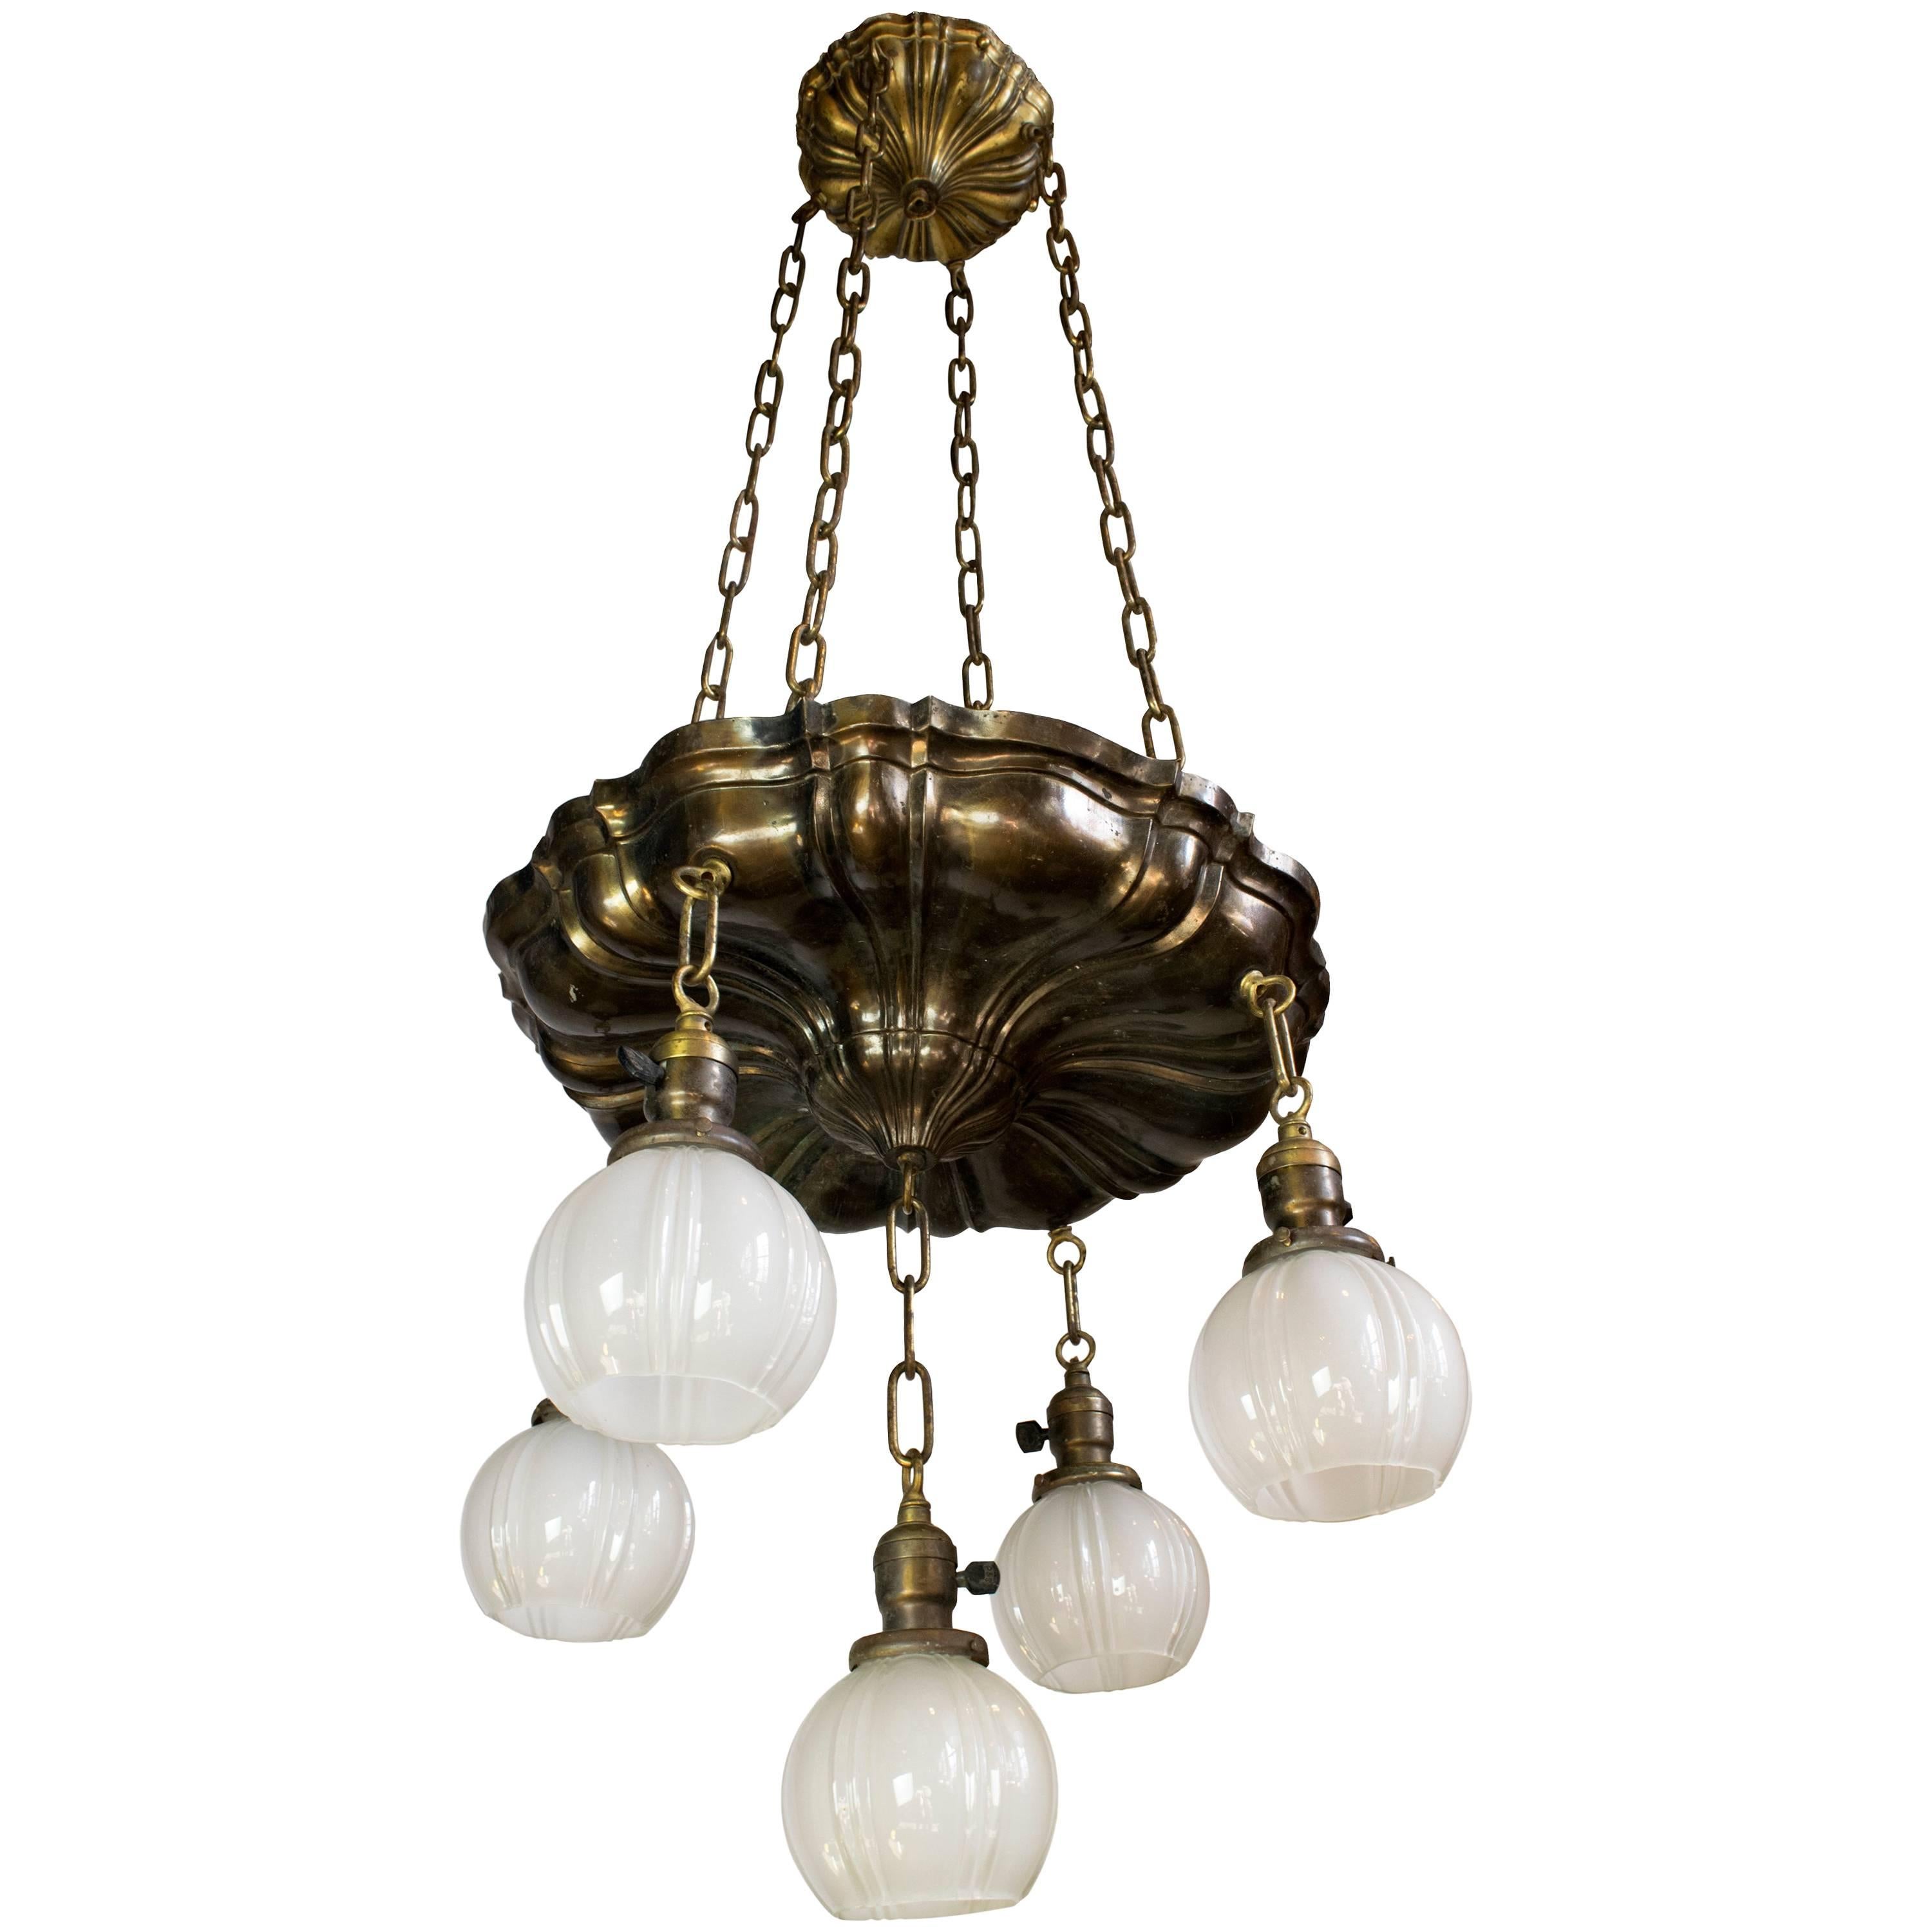 Five-Light Sheffield Chandelier with Shades